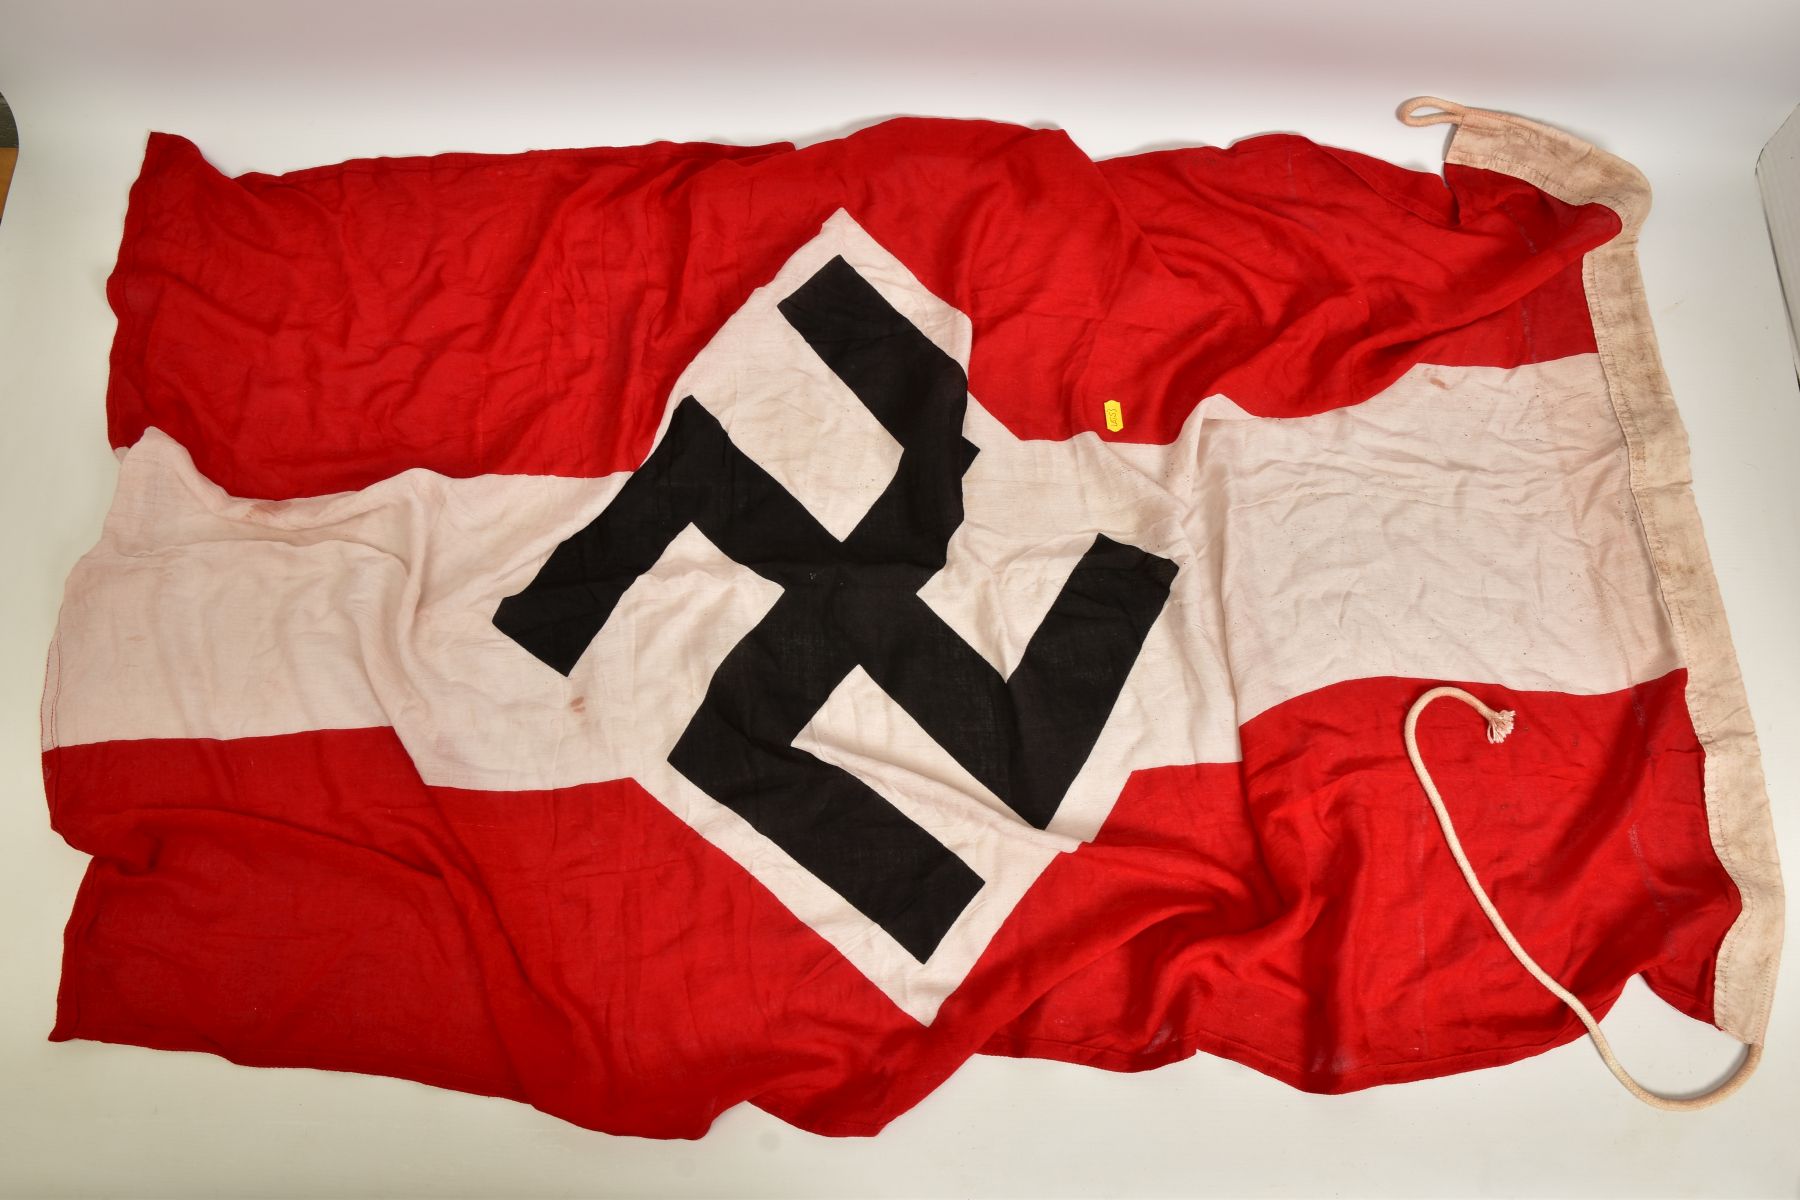 A 1943 DATED GERMAN 3RD REICH HITLER JUGEND (Hitler Youth) FLAG, size is approximately 180cm x - Image 4 of 4